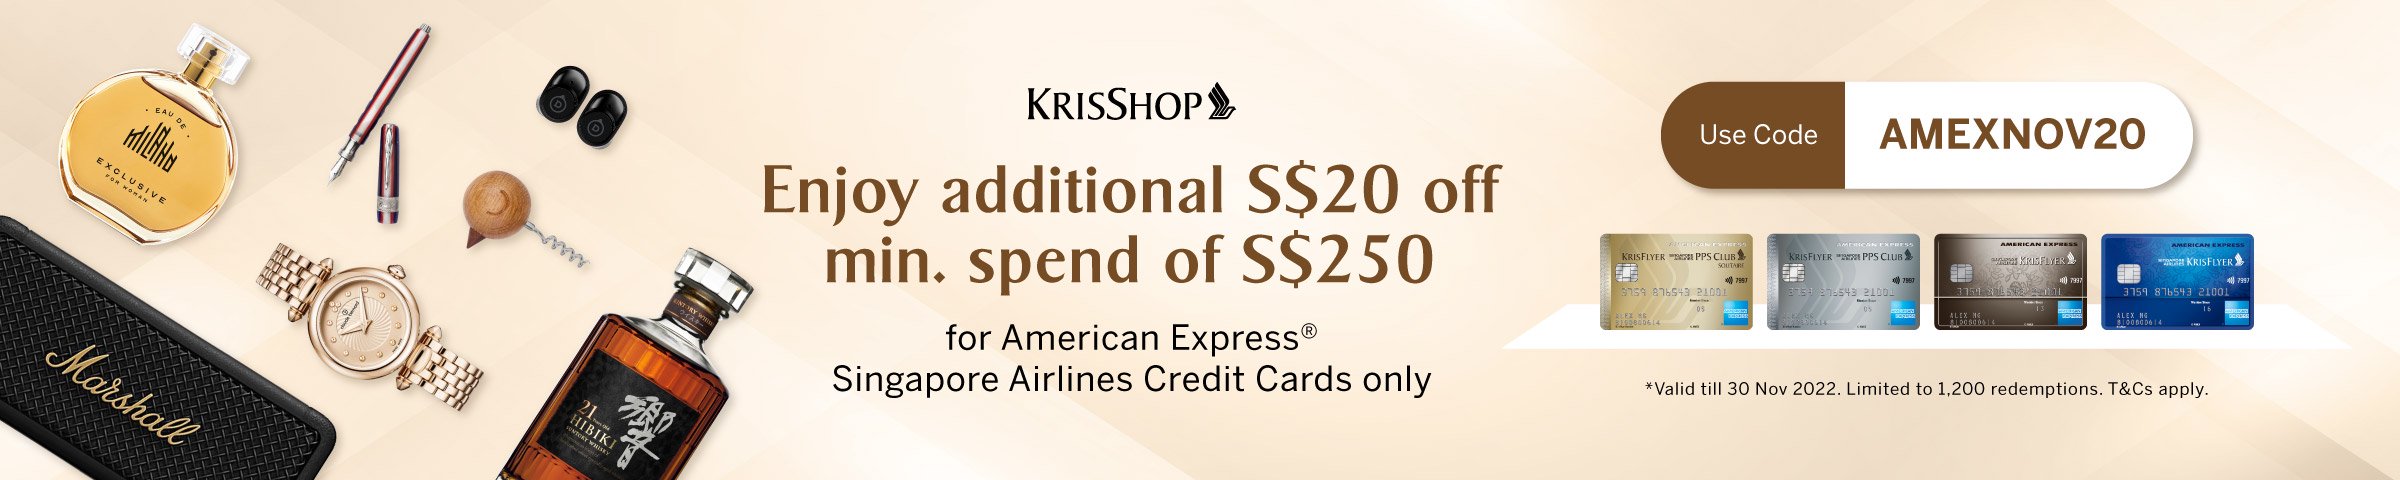 AMEX Exclusive Offer - Enjoy additional S$20 off with min. spend S$250